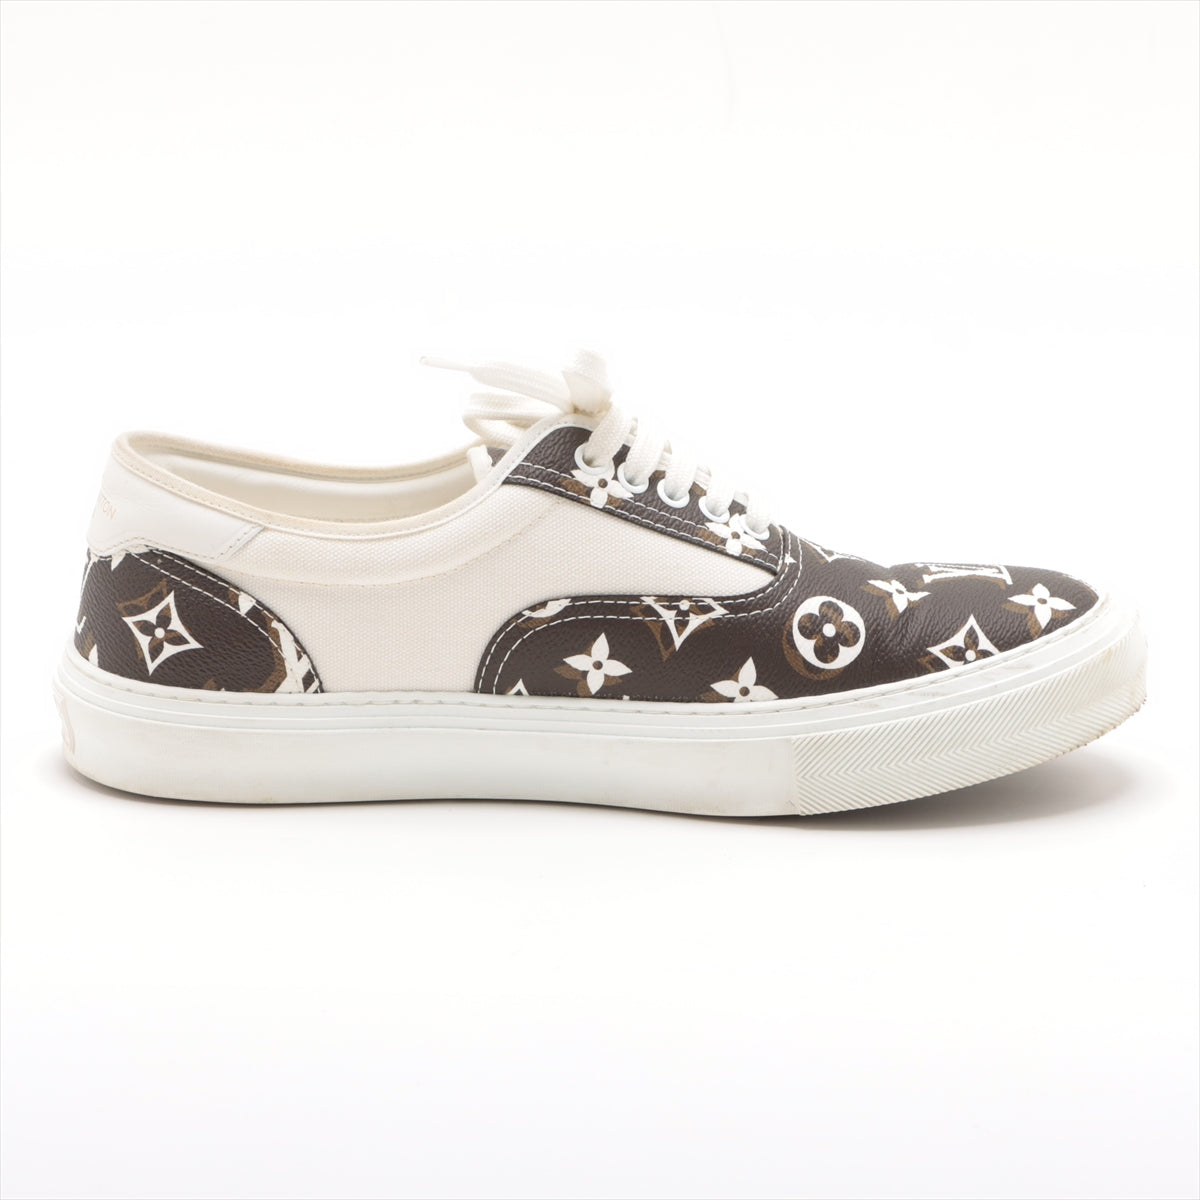 Louis Vuitton Trocadero line 19-year Canvas & leather Sneakers 8 1/2 Men's White x brown FA1109 Monogram Is there a replacement string